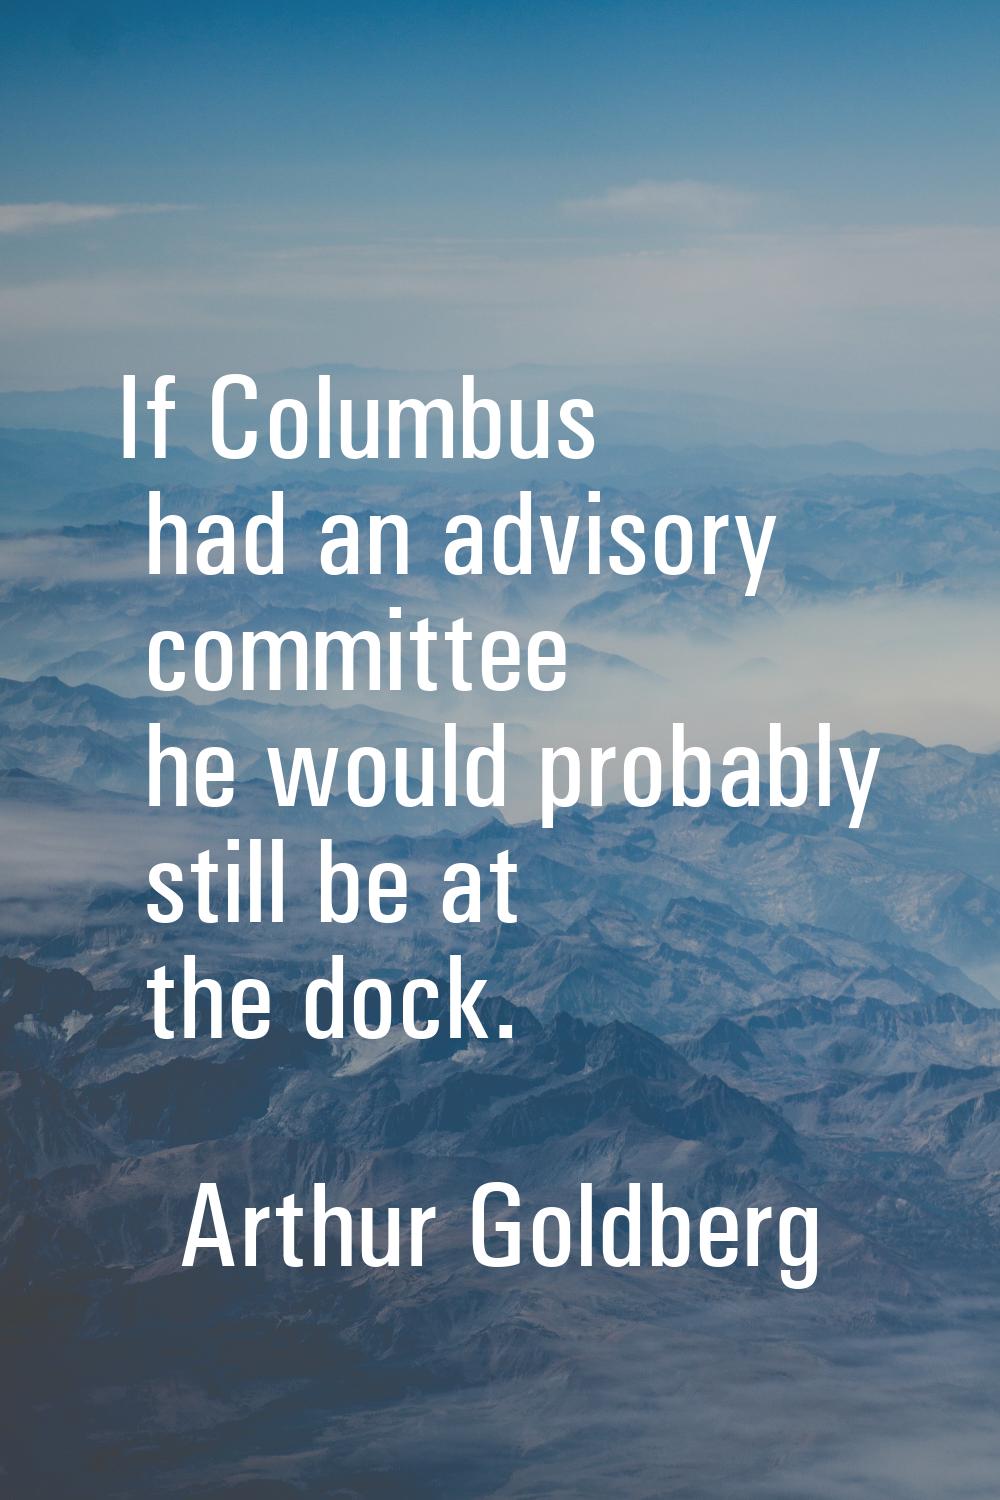 If Columbus had an advisory committee he would probably still be at the dock.